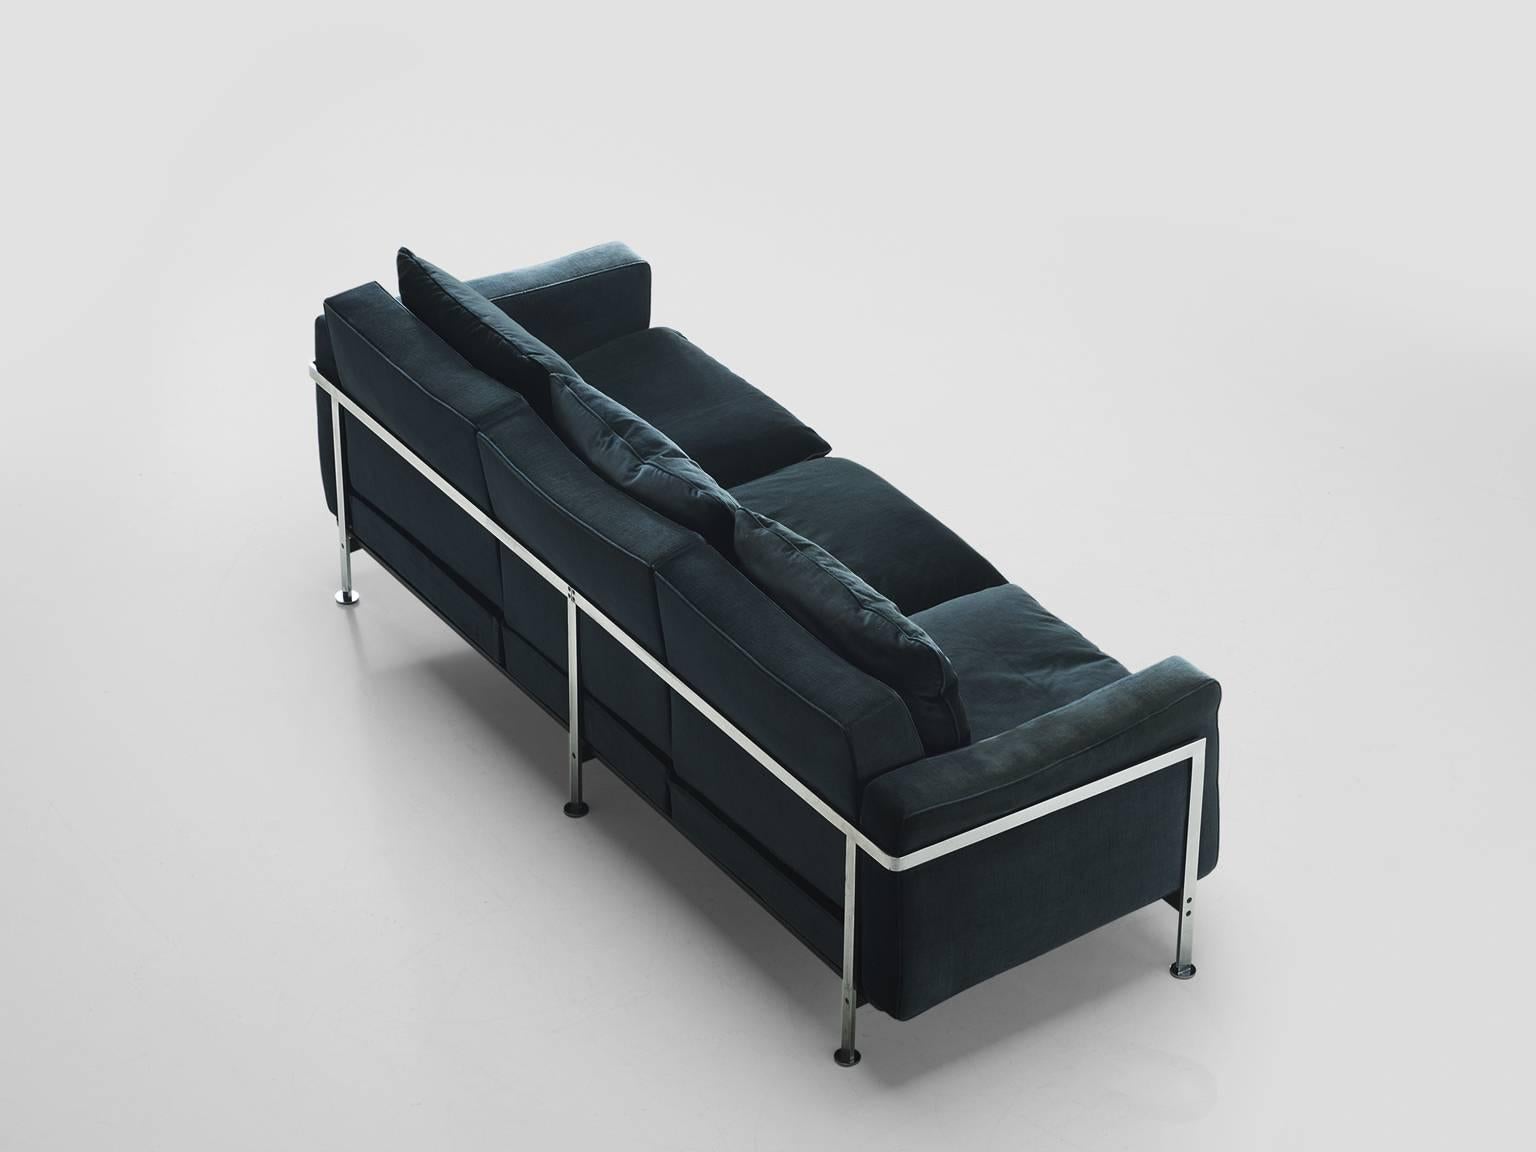 Sofa in blue velvet by Robert Hausmann for De Sede, Switzerland,1954.

This comfortable velvet sofa is designed with a chromed iron frame that functions as a basket for the cushions on the inside. The thick back and seat cushion provide an